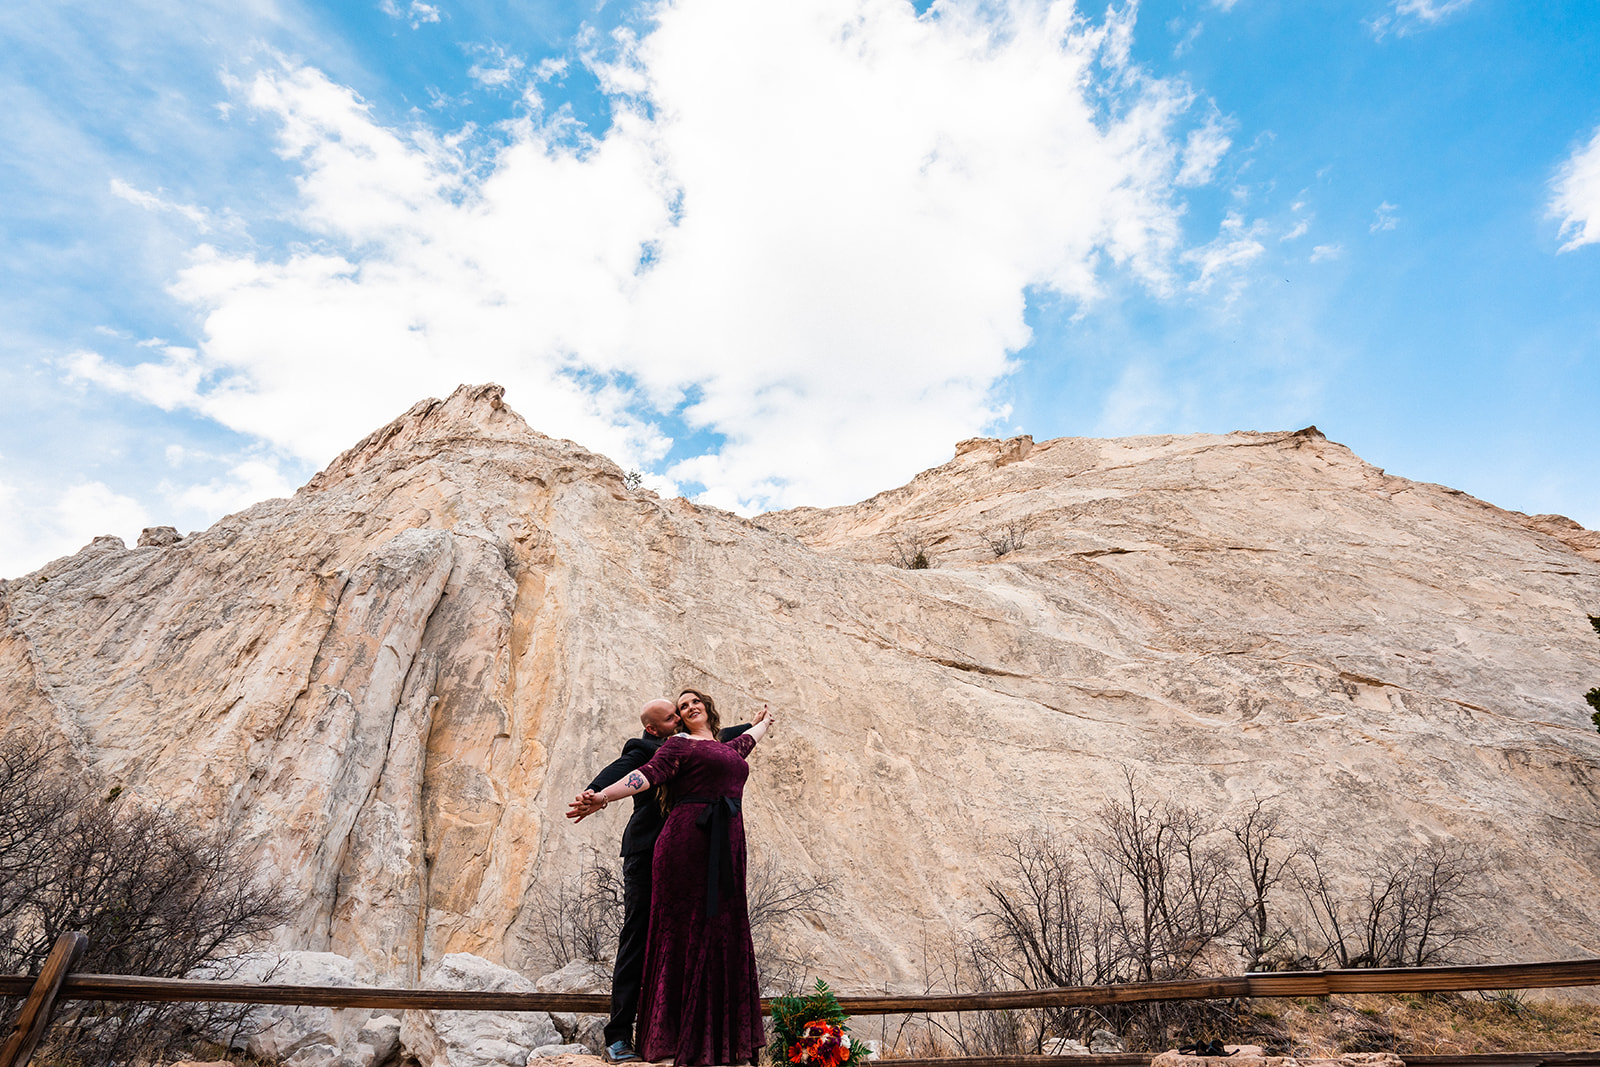 Newlyweds in formal attire embrace at the base of White Rock beneath blue and cloudy skies during their Garden of the Gods elopement in Colorado Springs.